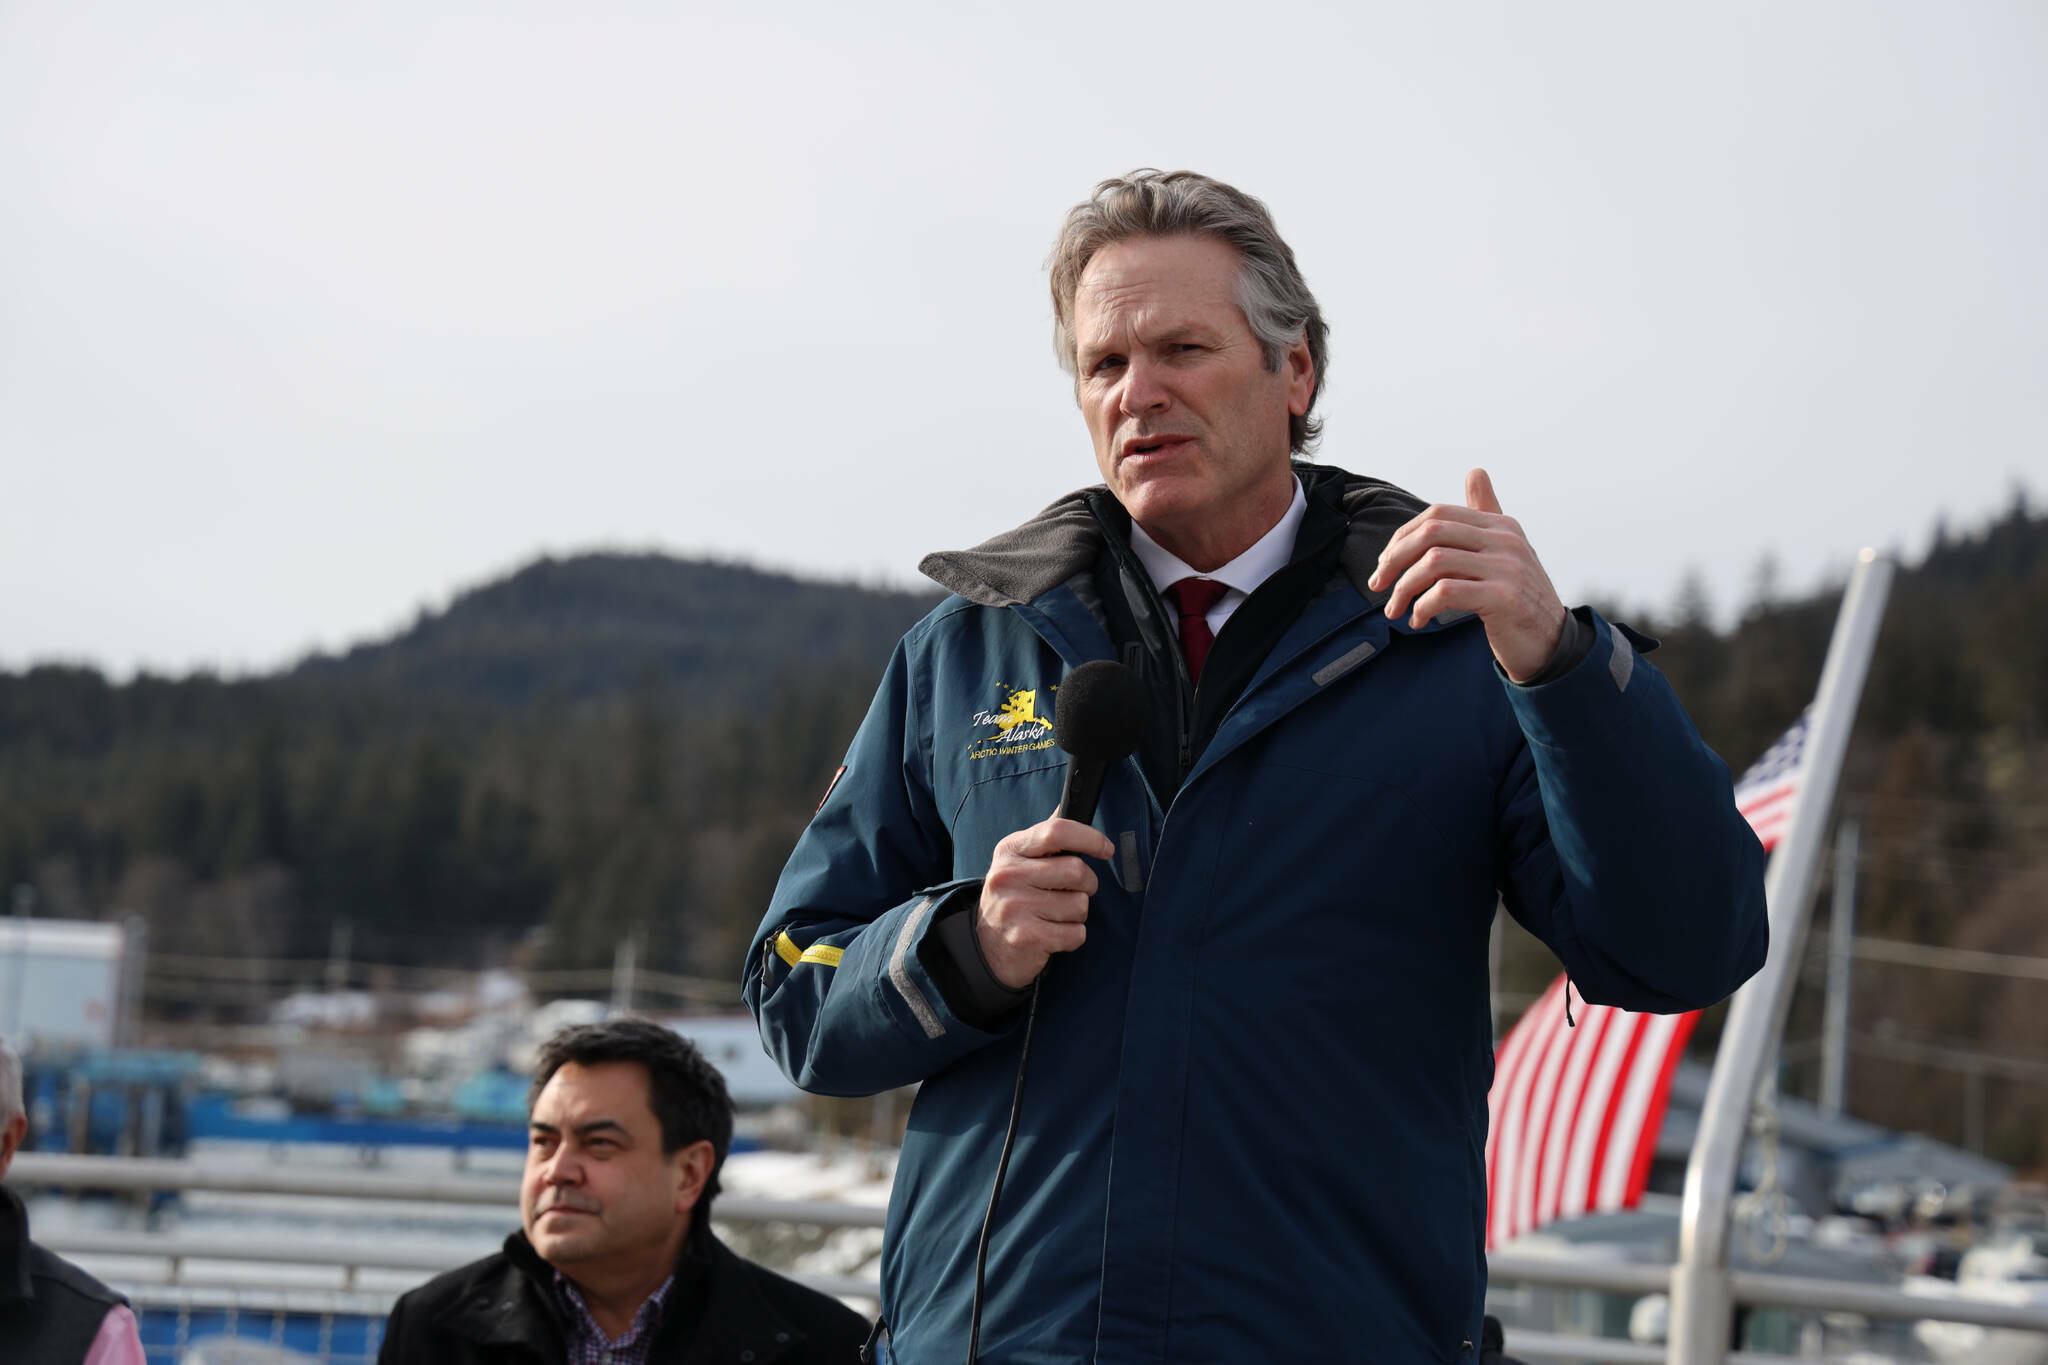 Gov. Mike Dunleavy speaks in March of 2023 in support of an agreement between the Alaska Department of Transportation and Public Facilities and Goldbelt Inc. to pursue engineering and design services to determine whether it’s feasible to build a new ferry terminal facility in Juneau at Cascade Point. (Clarise Larson / Juneau Empire file photo)